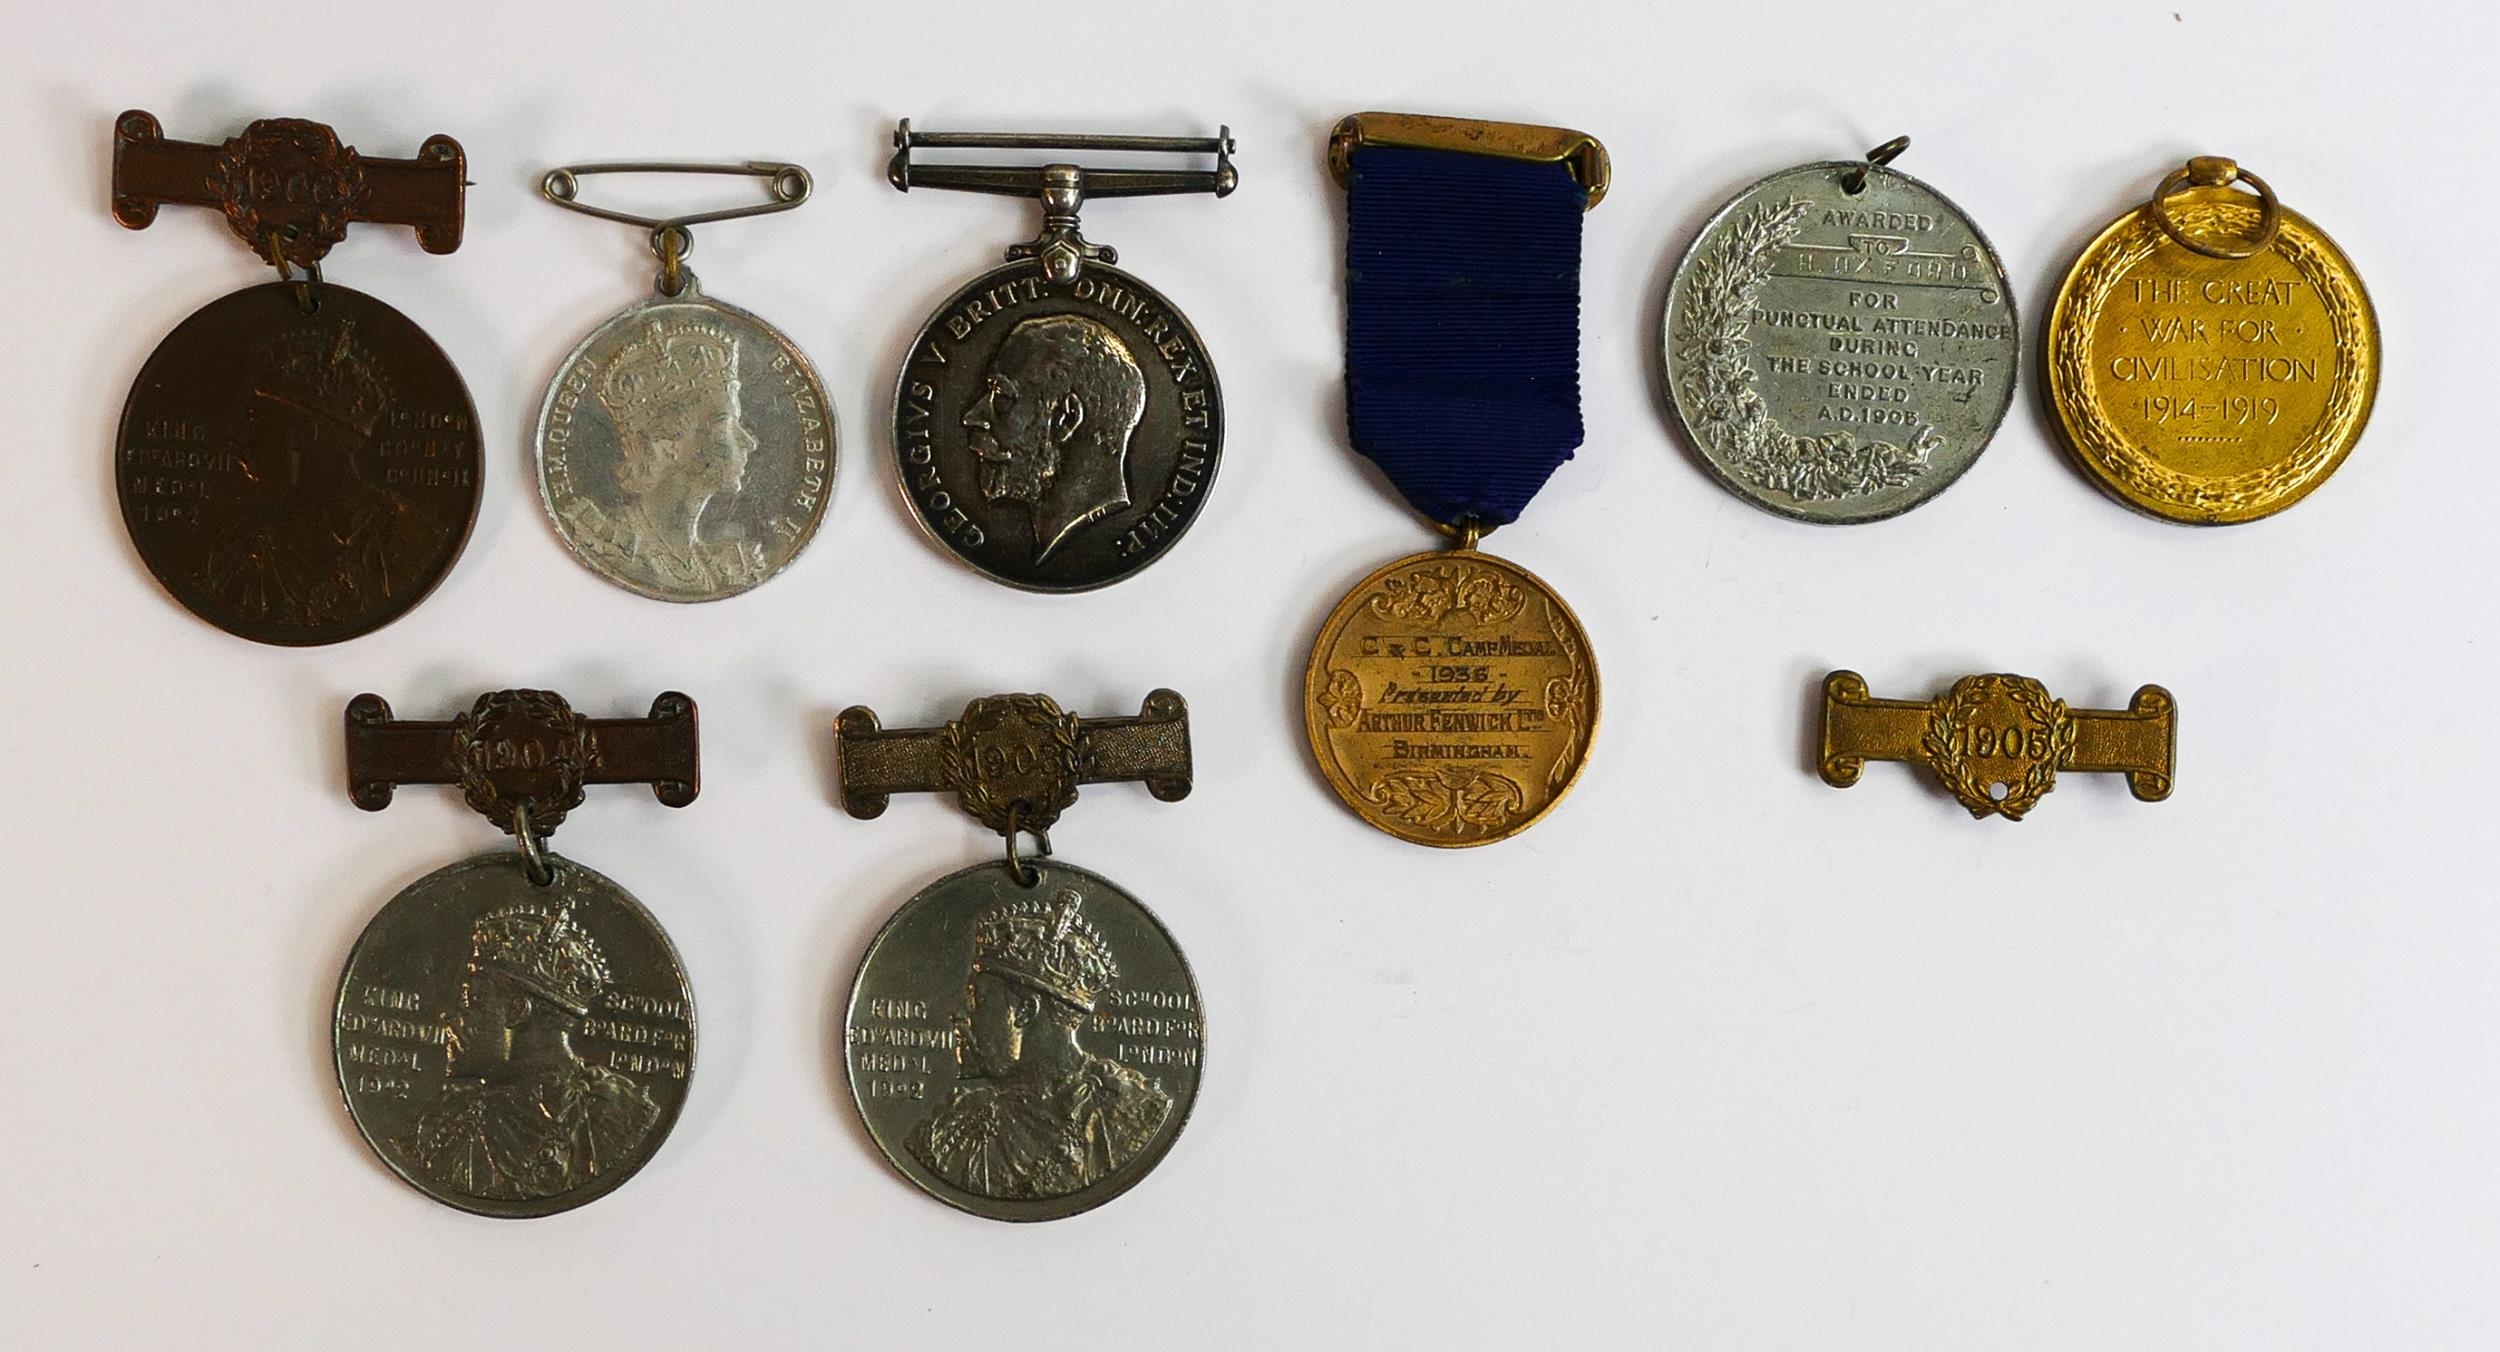 Pair first world war medals awarded to 302486 Pte H.Oxford.Essex.R comprising 1914-1918 Victory